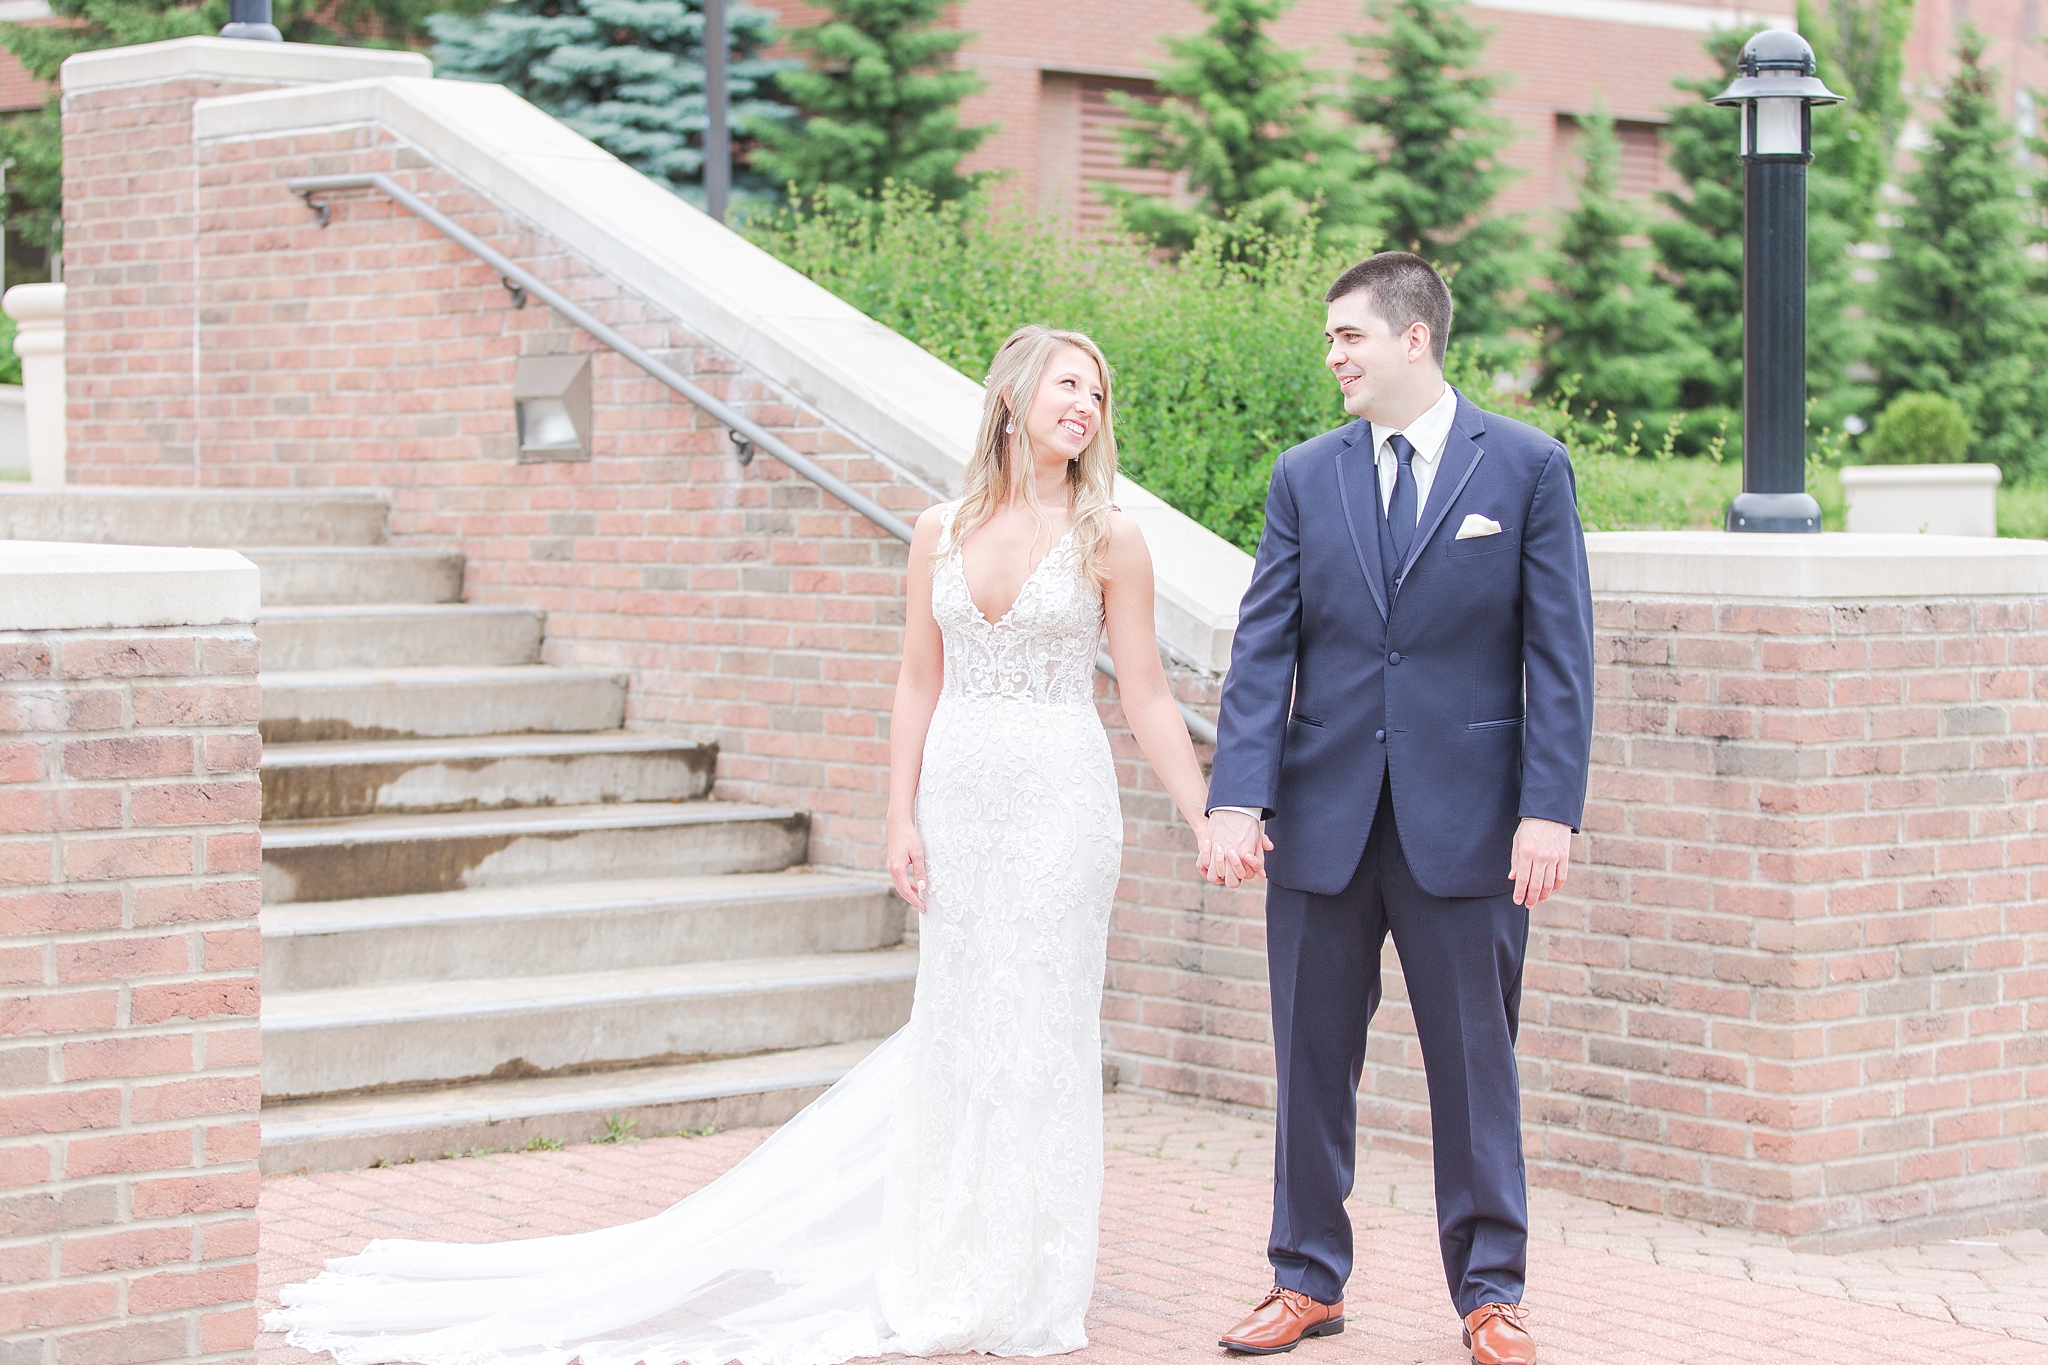 candid-romantic-wedding-photos-at-the-h-hotel-in-midland-michigan-by-courtney-carolyn-photography_0030.jpg